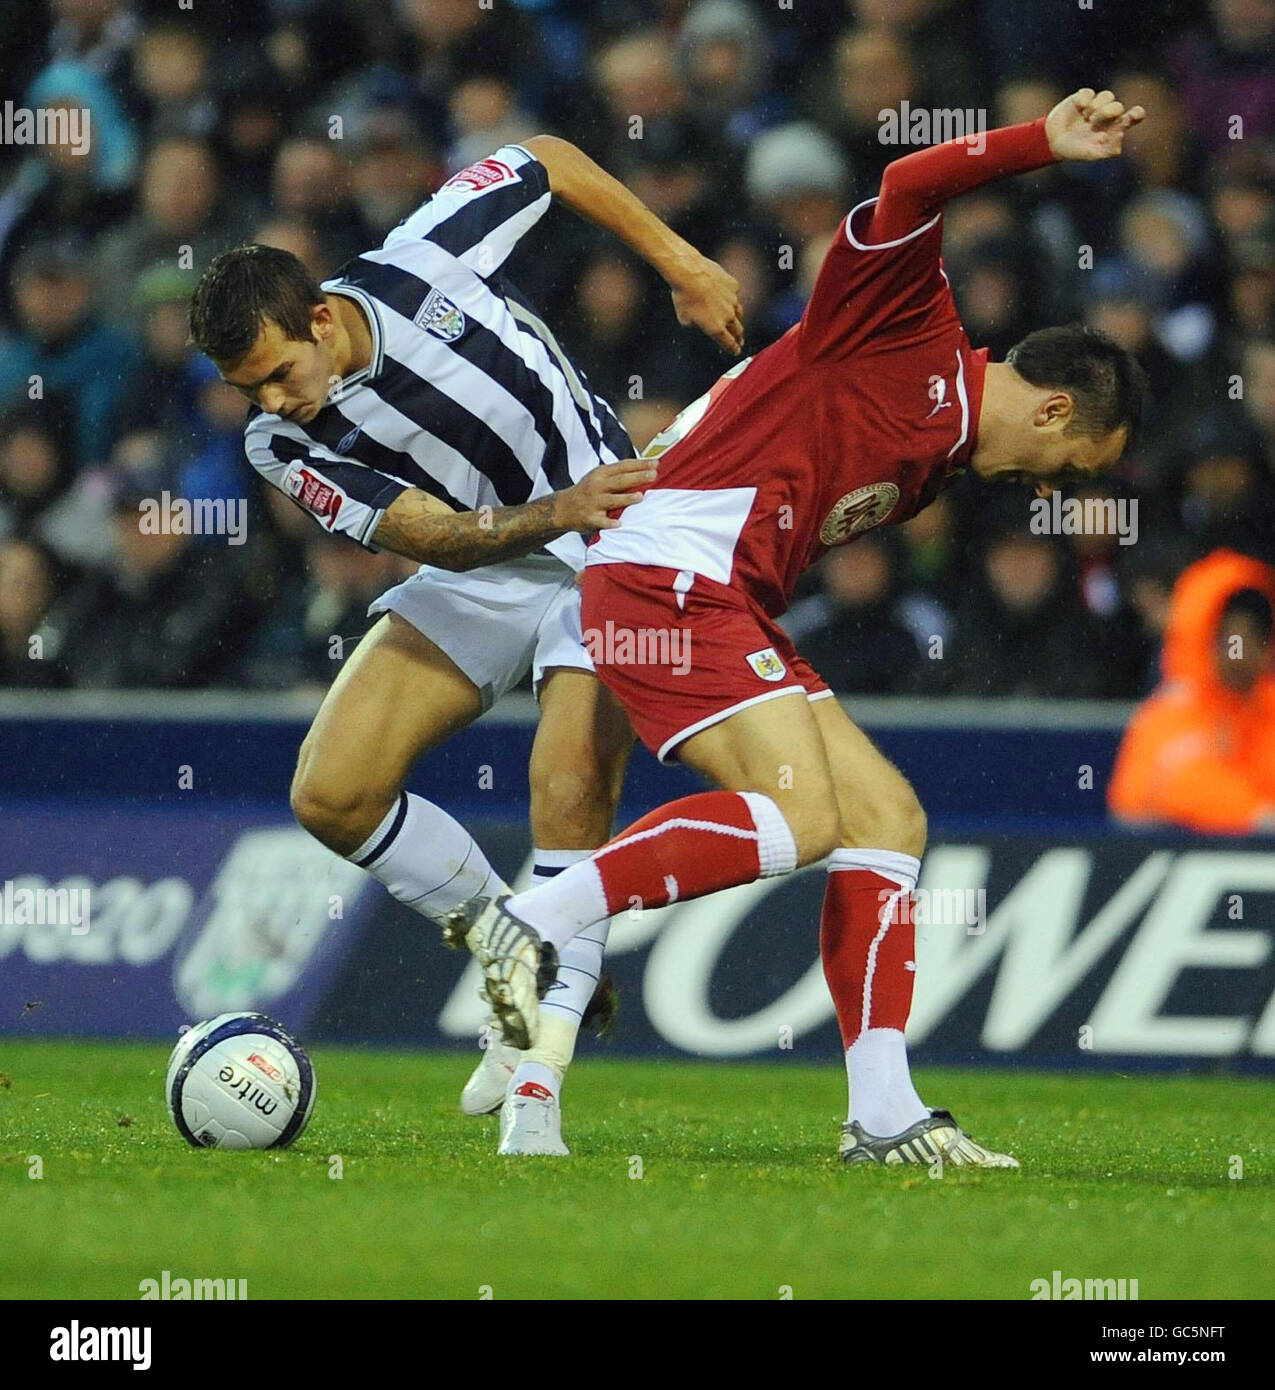 West Bromwich Albion's Joe Mattock (right) battles for the ball with Bristol City's Gavin Williams during the Coca-Cola Football League Championship match at the Hawthorns, West Bromwich. Stock Photo